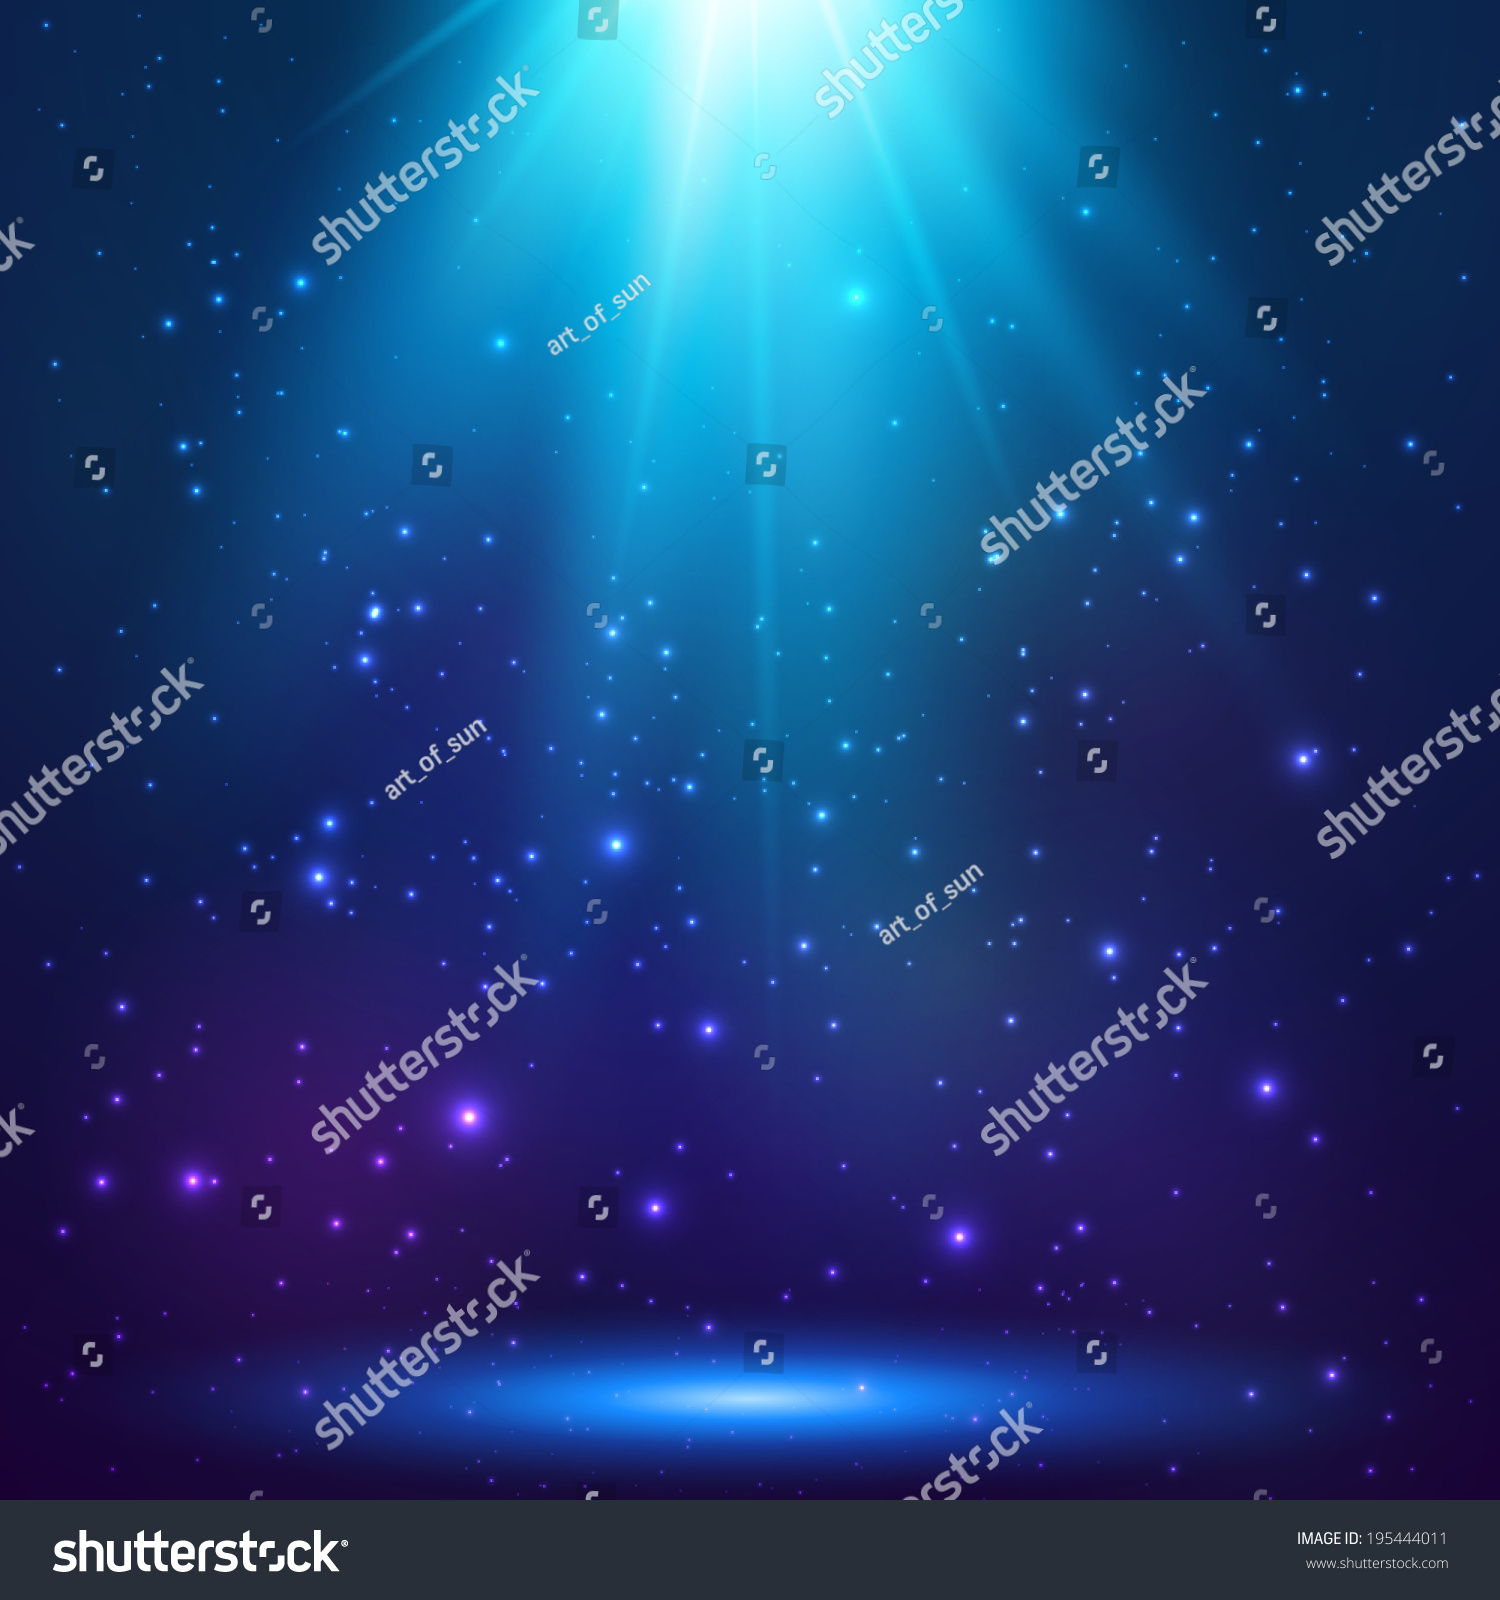 Blue Magic Light With Particles Stock Photo 195444011 : Shutterstock